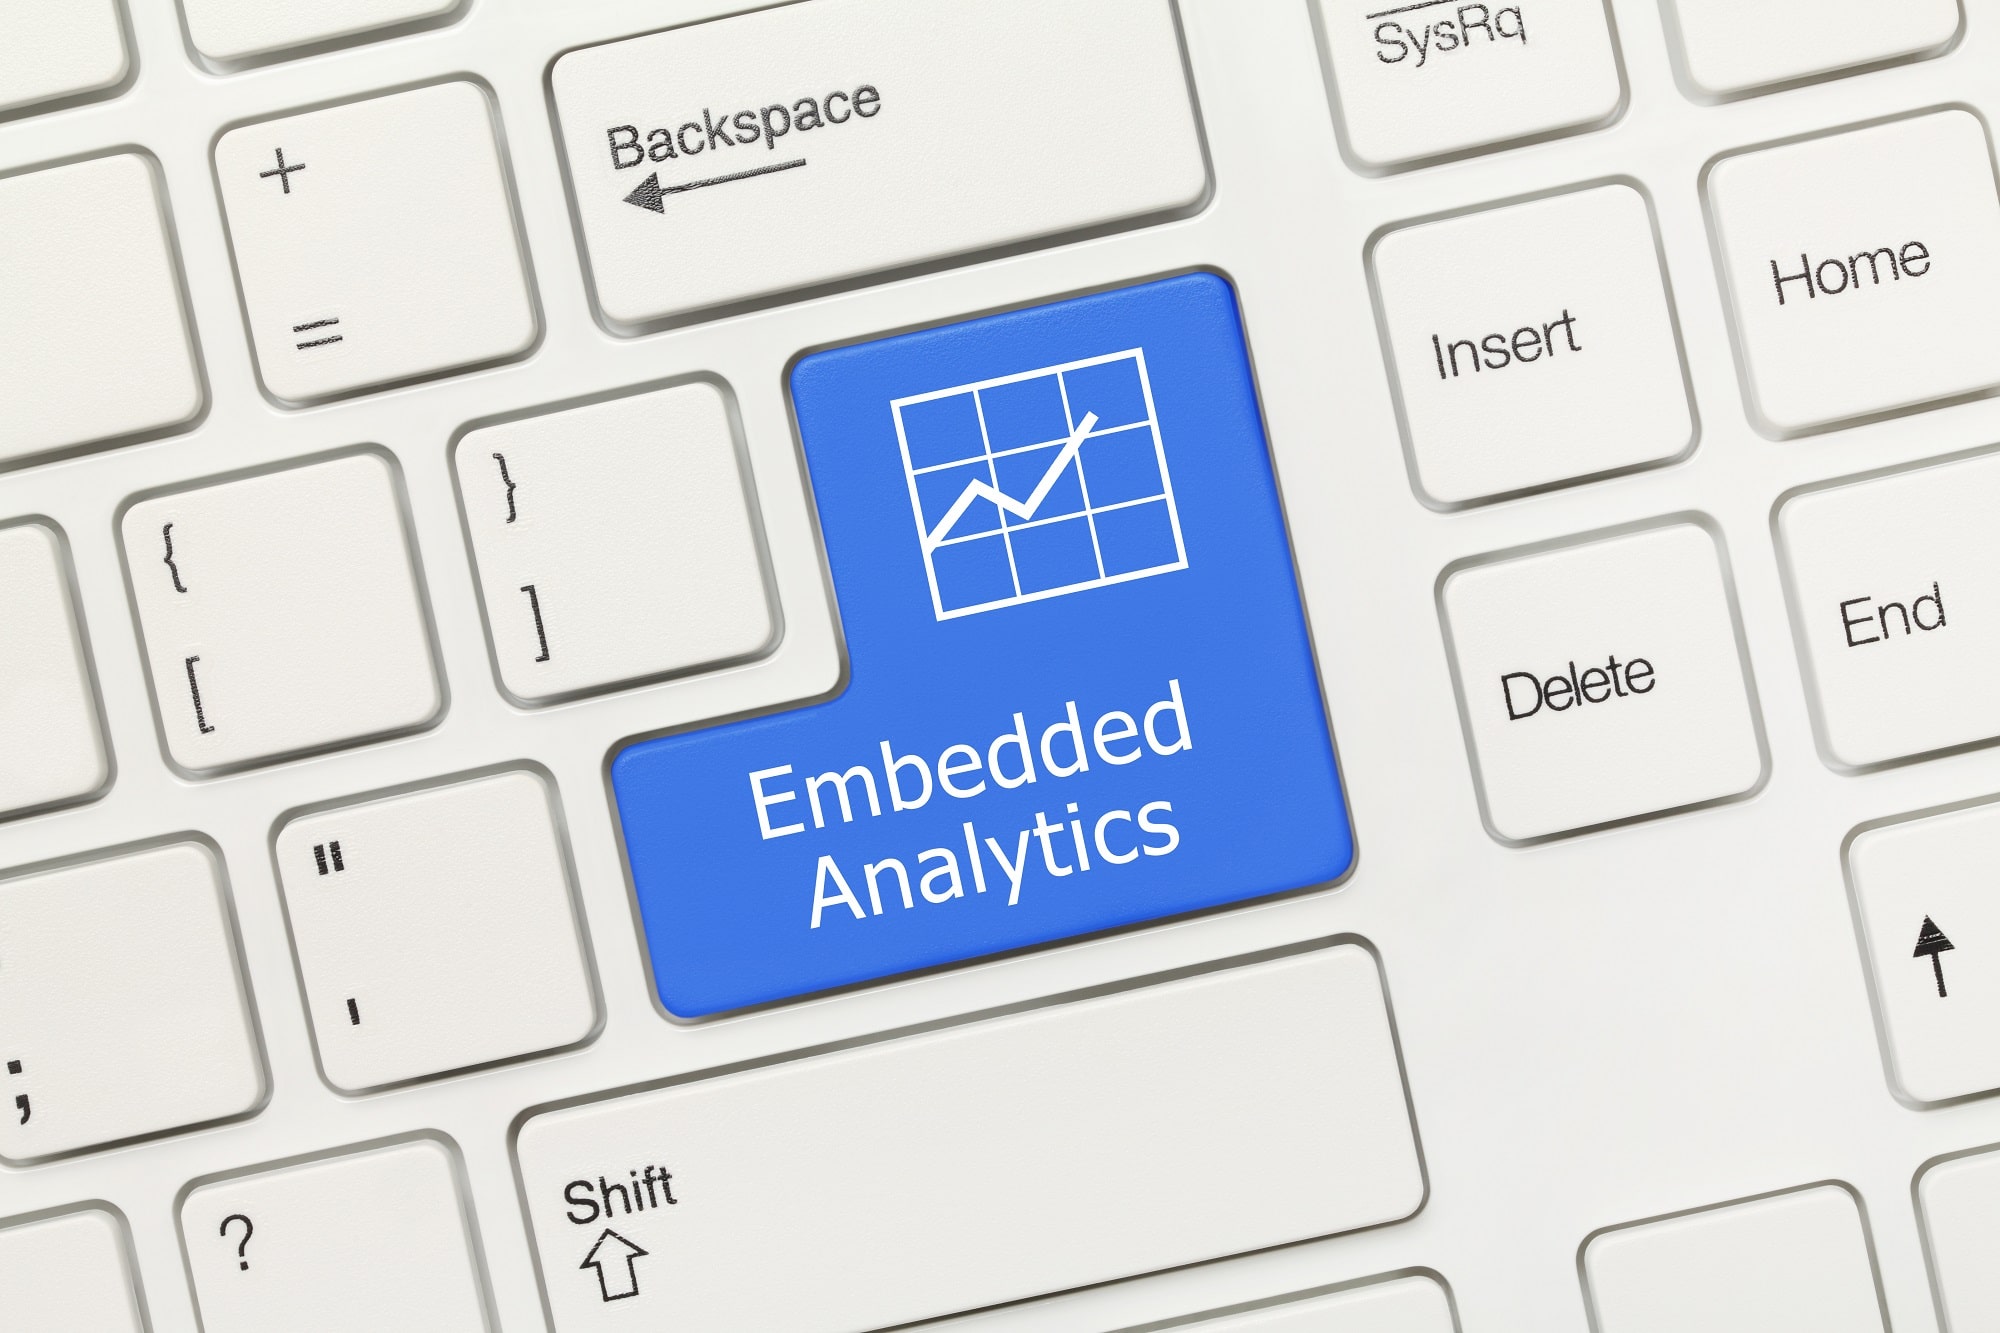 Embed analytics in applications to transform your technology business